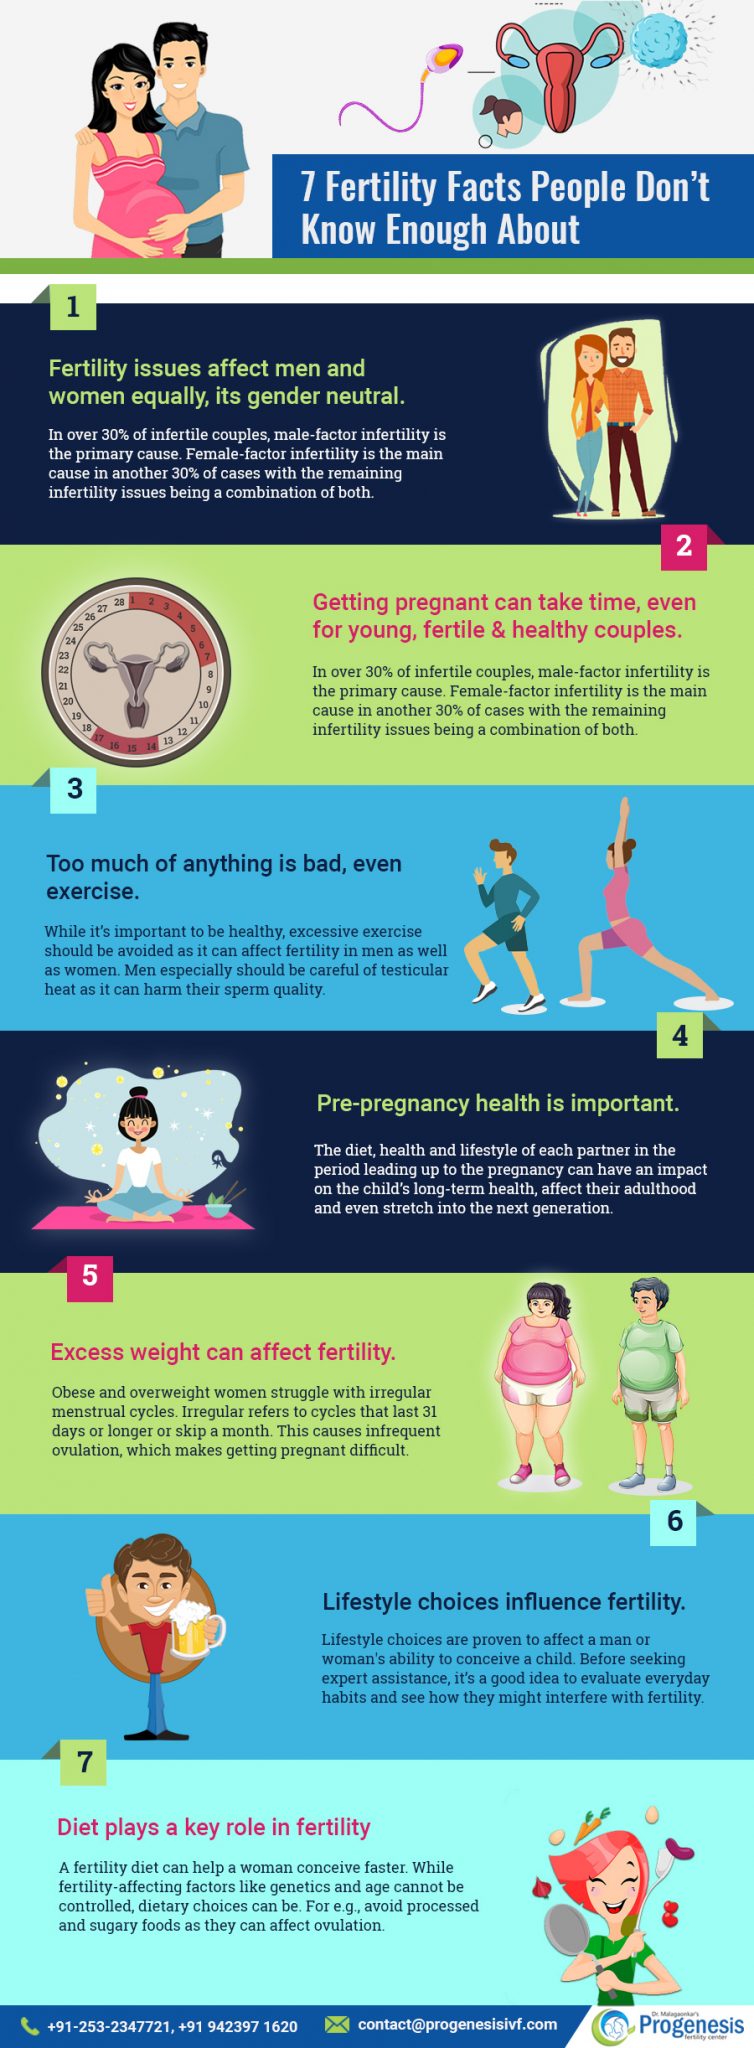 7 Fertility Facts People Don’t Know Enough About